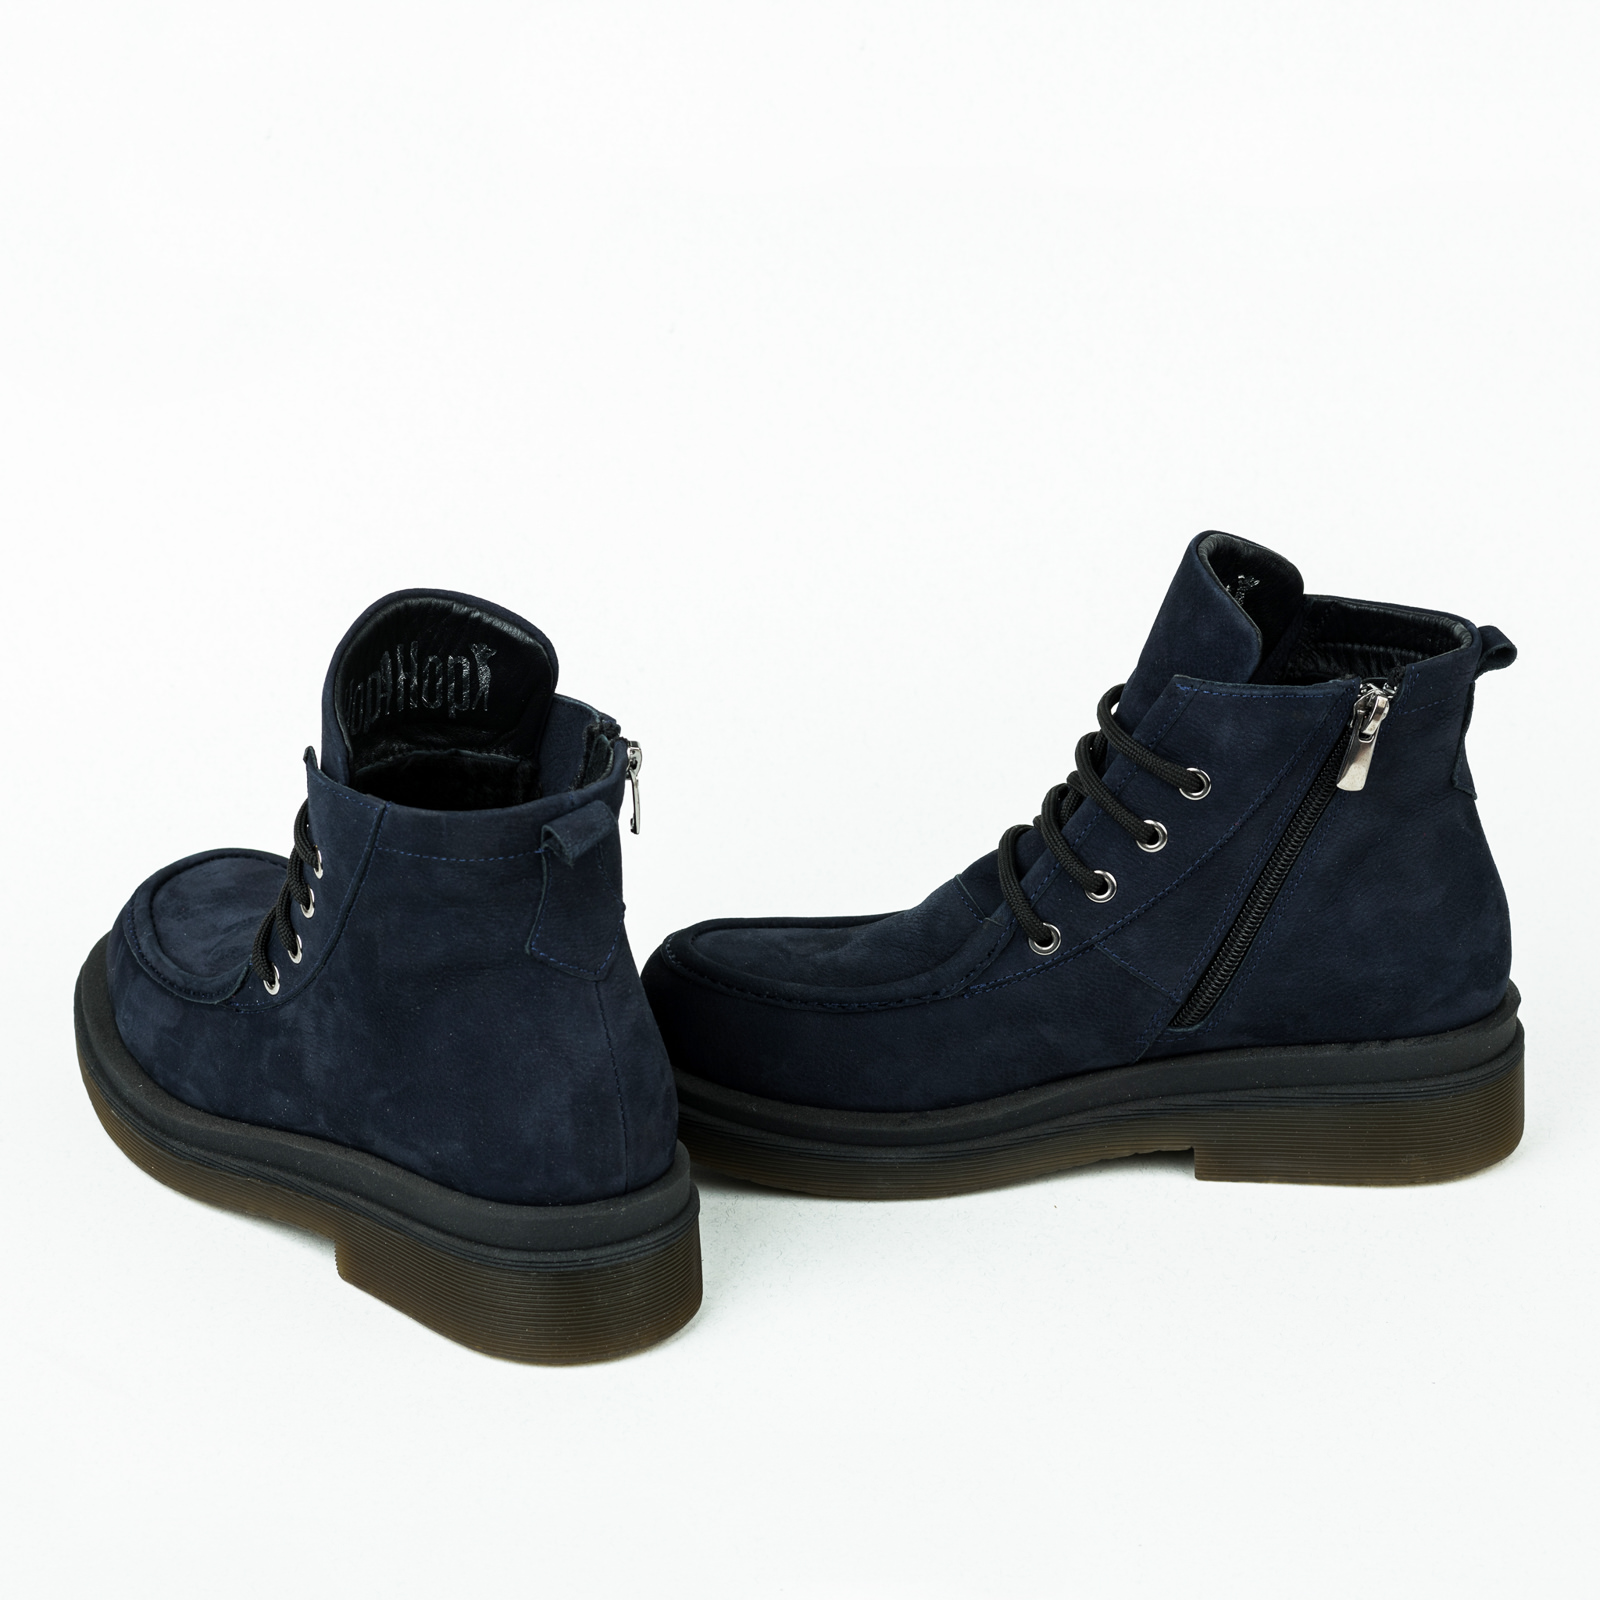 Leather ankle boots B057 - NAVY